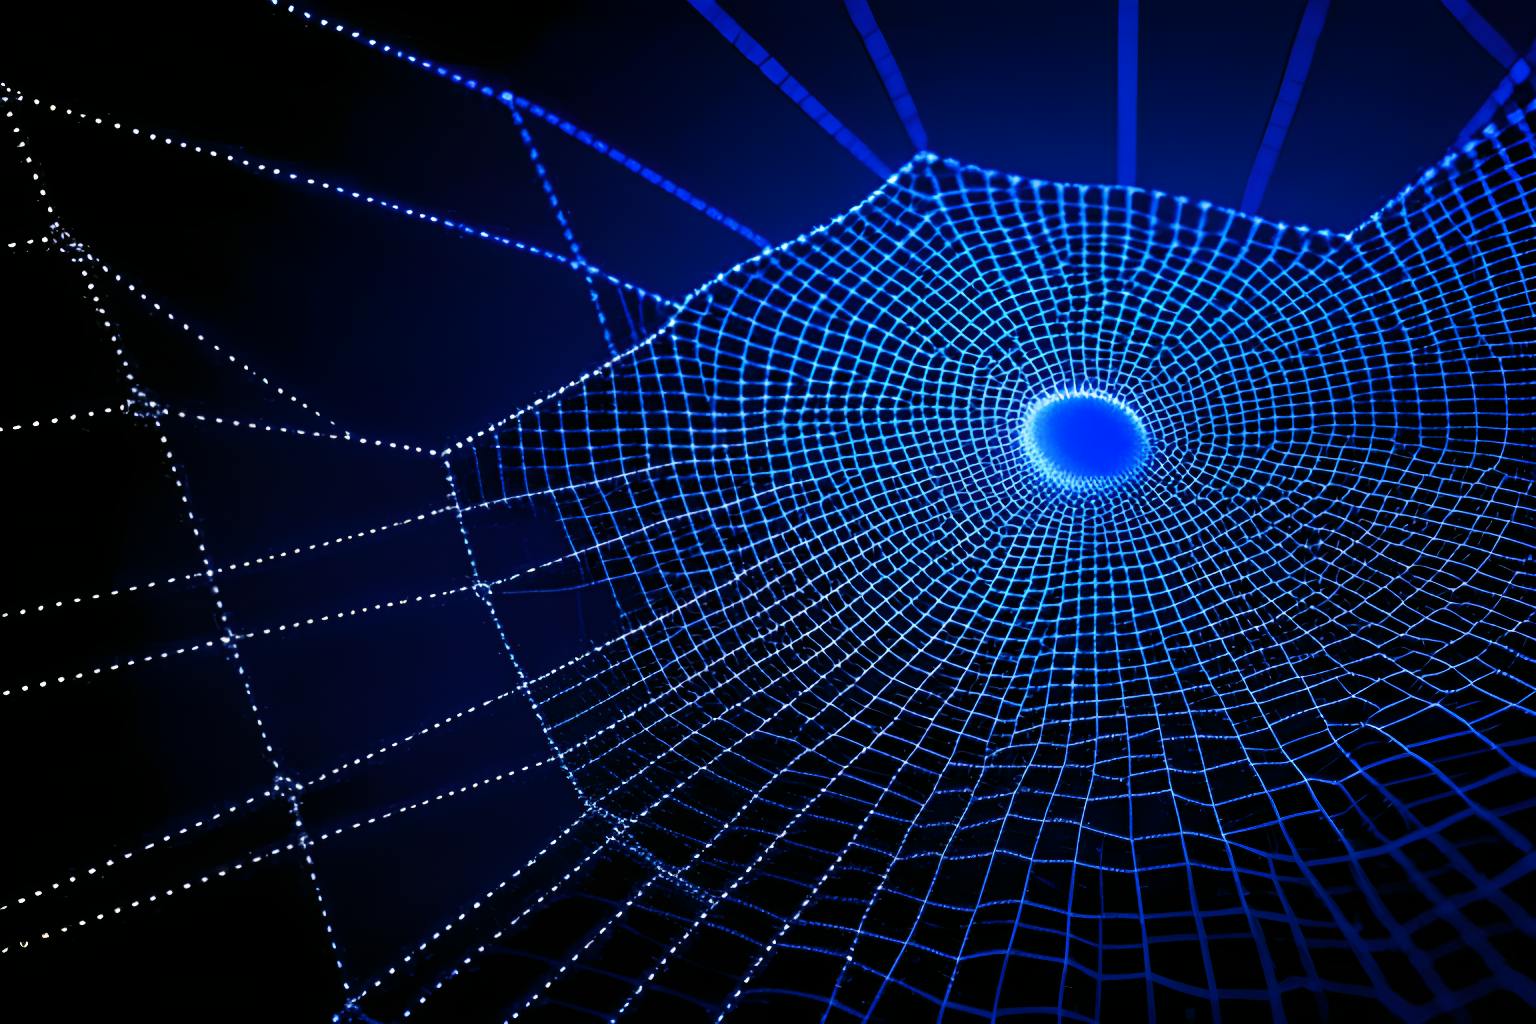 Metaphysics and Mathematics: The Intricate Web Connecting the Two